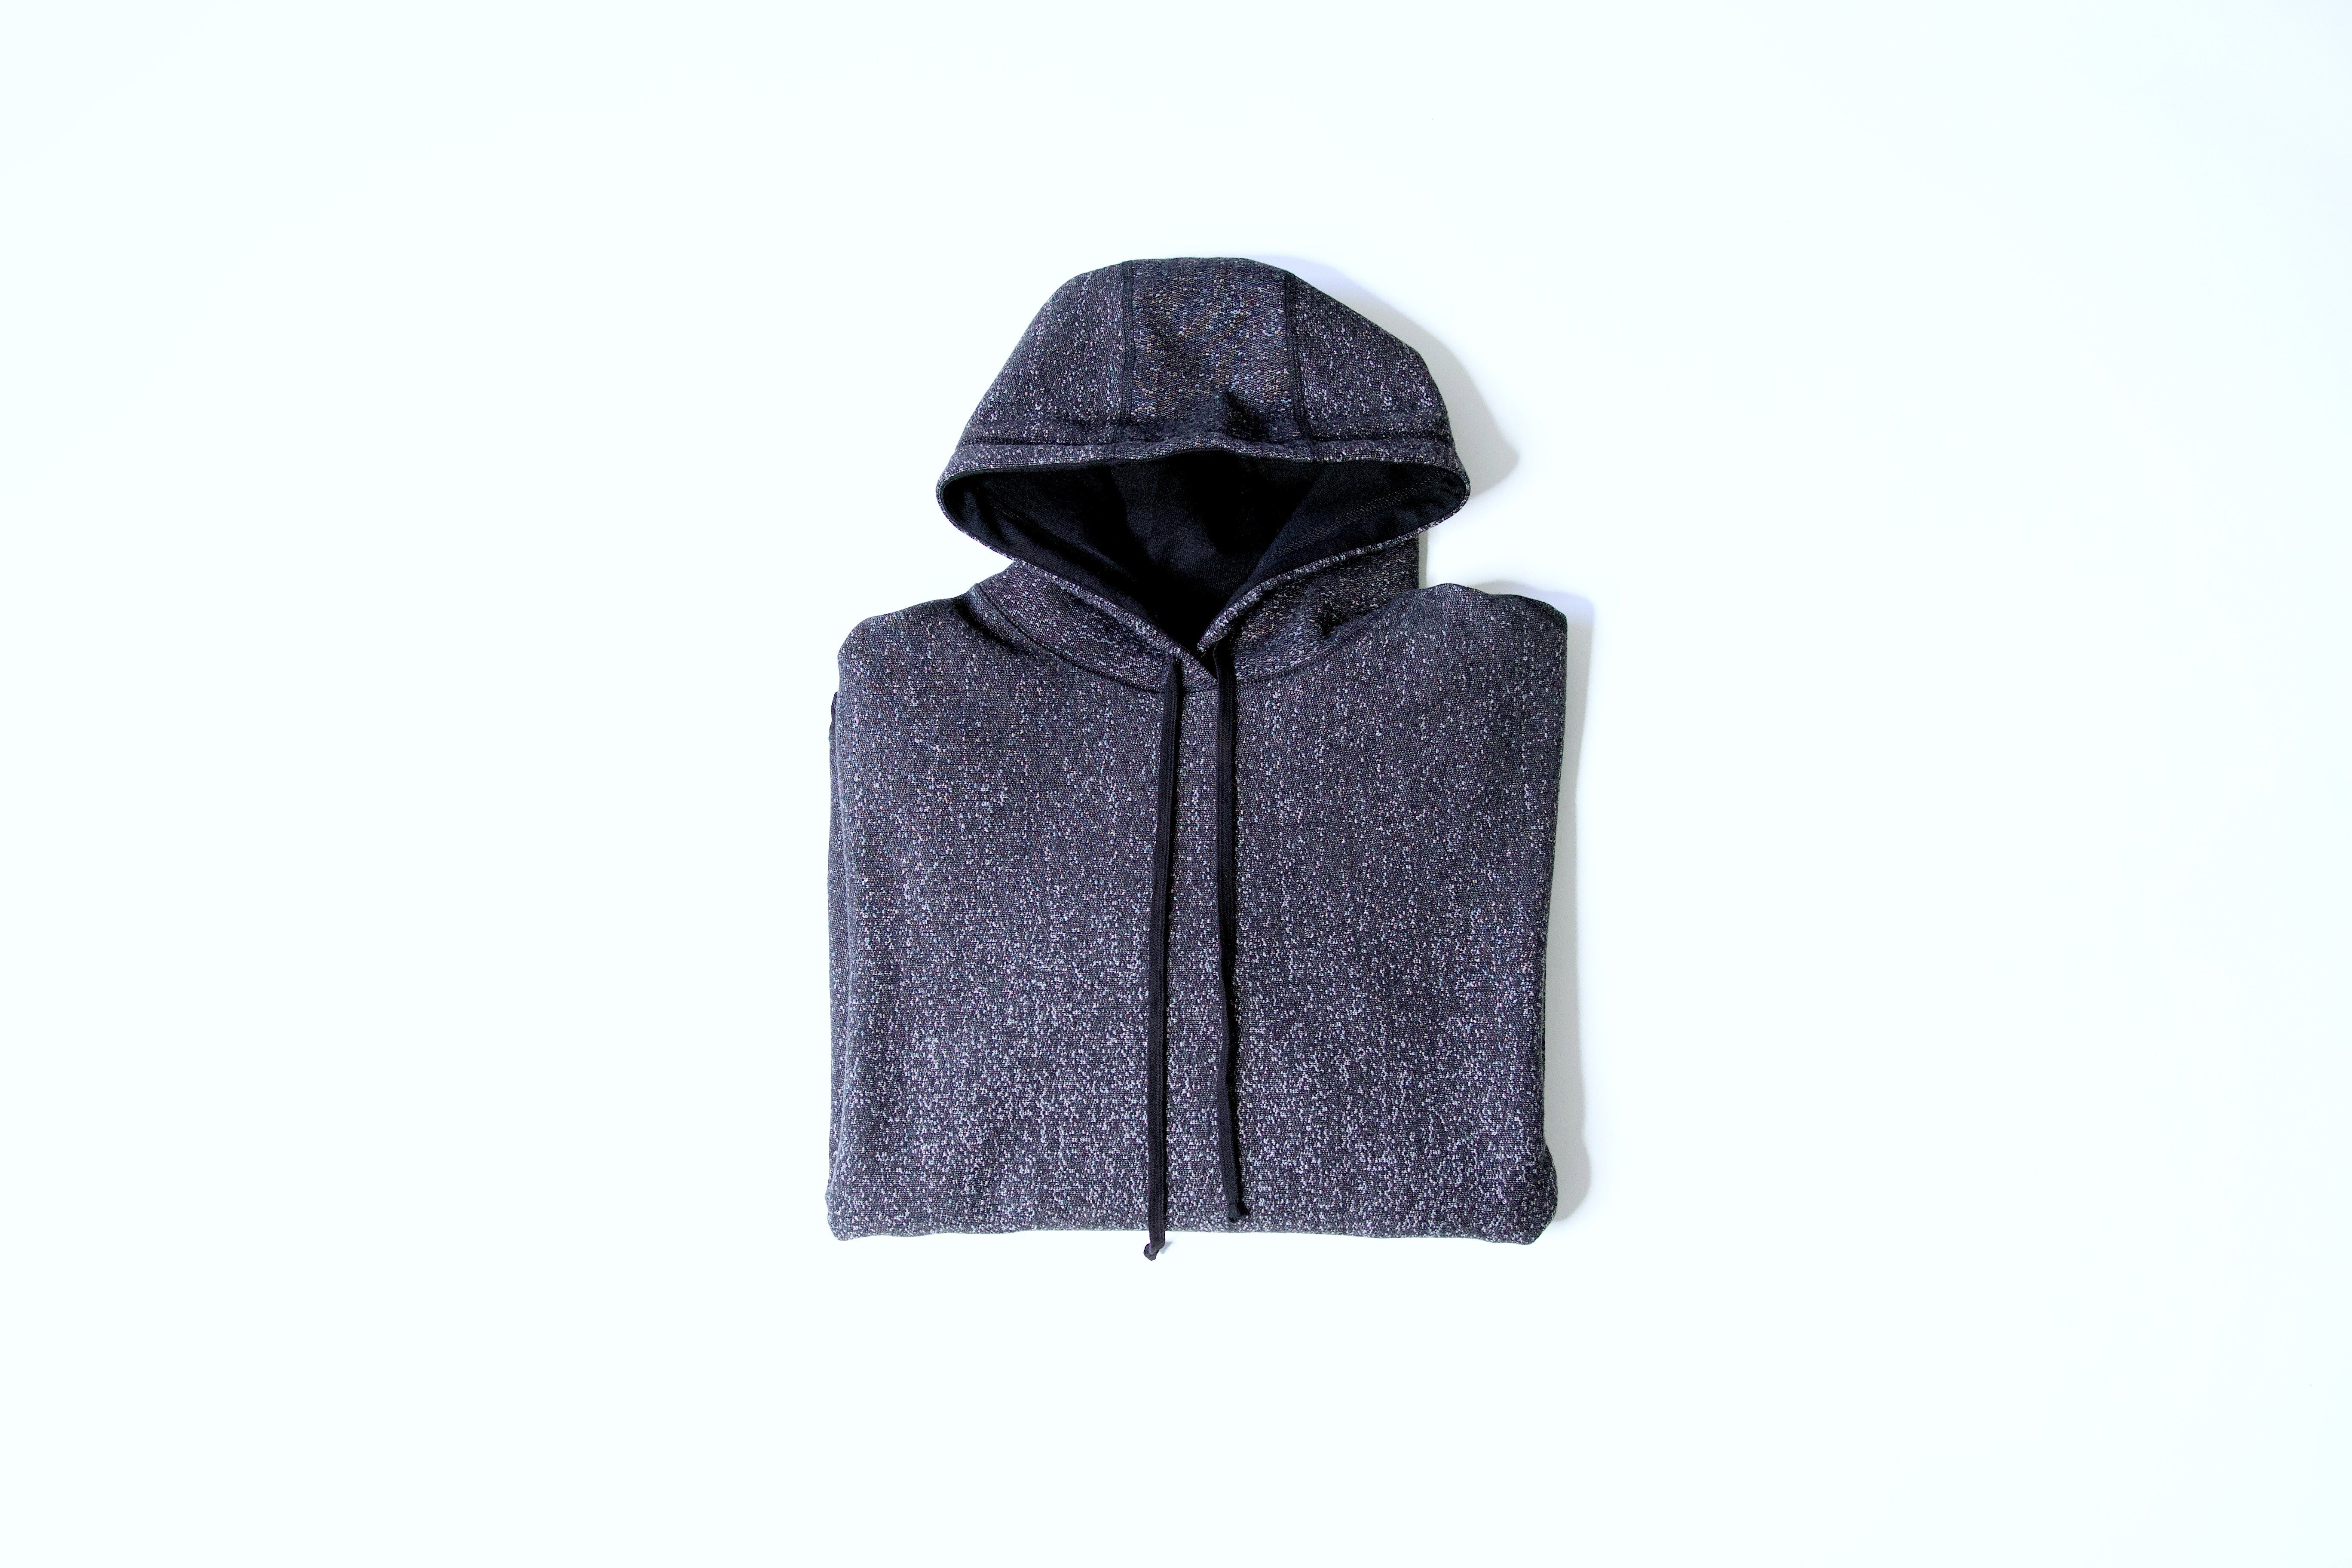 The "Lifetime" Hooded Sweatshirt in Speckled Charcoal